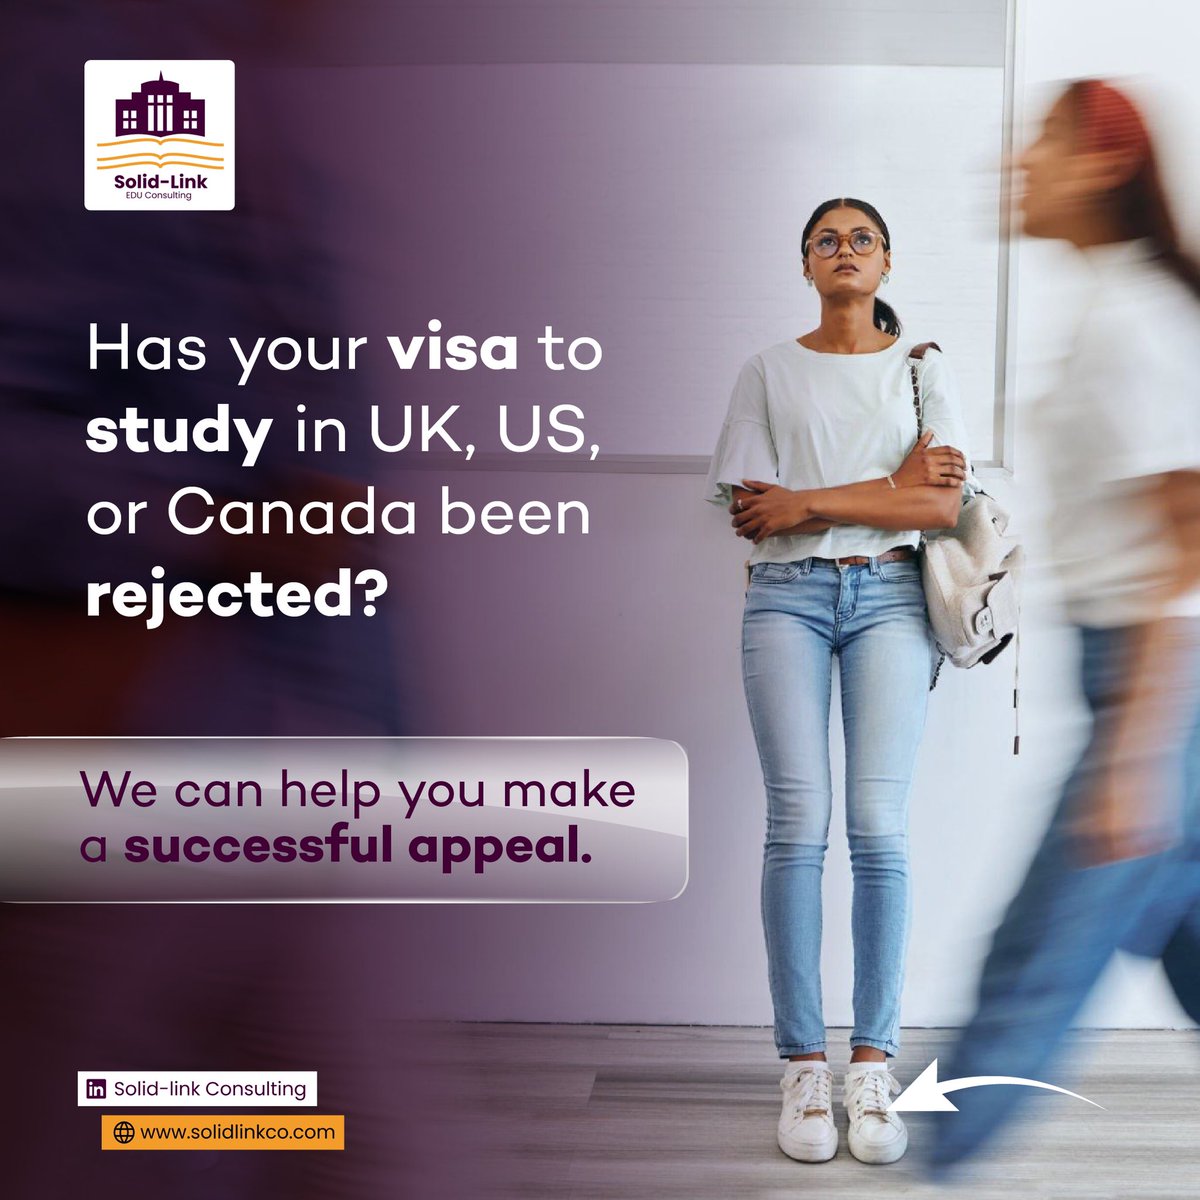 A visa rejection is not the end. With the help of our advisors you can make a successful appeals. 100% money-back guarantee. Send a message or contact us via the info in our bio to get started. 
. . .
#studyabroad #studentvisa #visaappeal #visarejection #visarejected #studyinuk